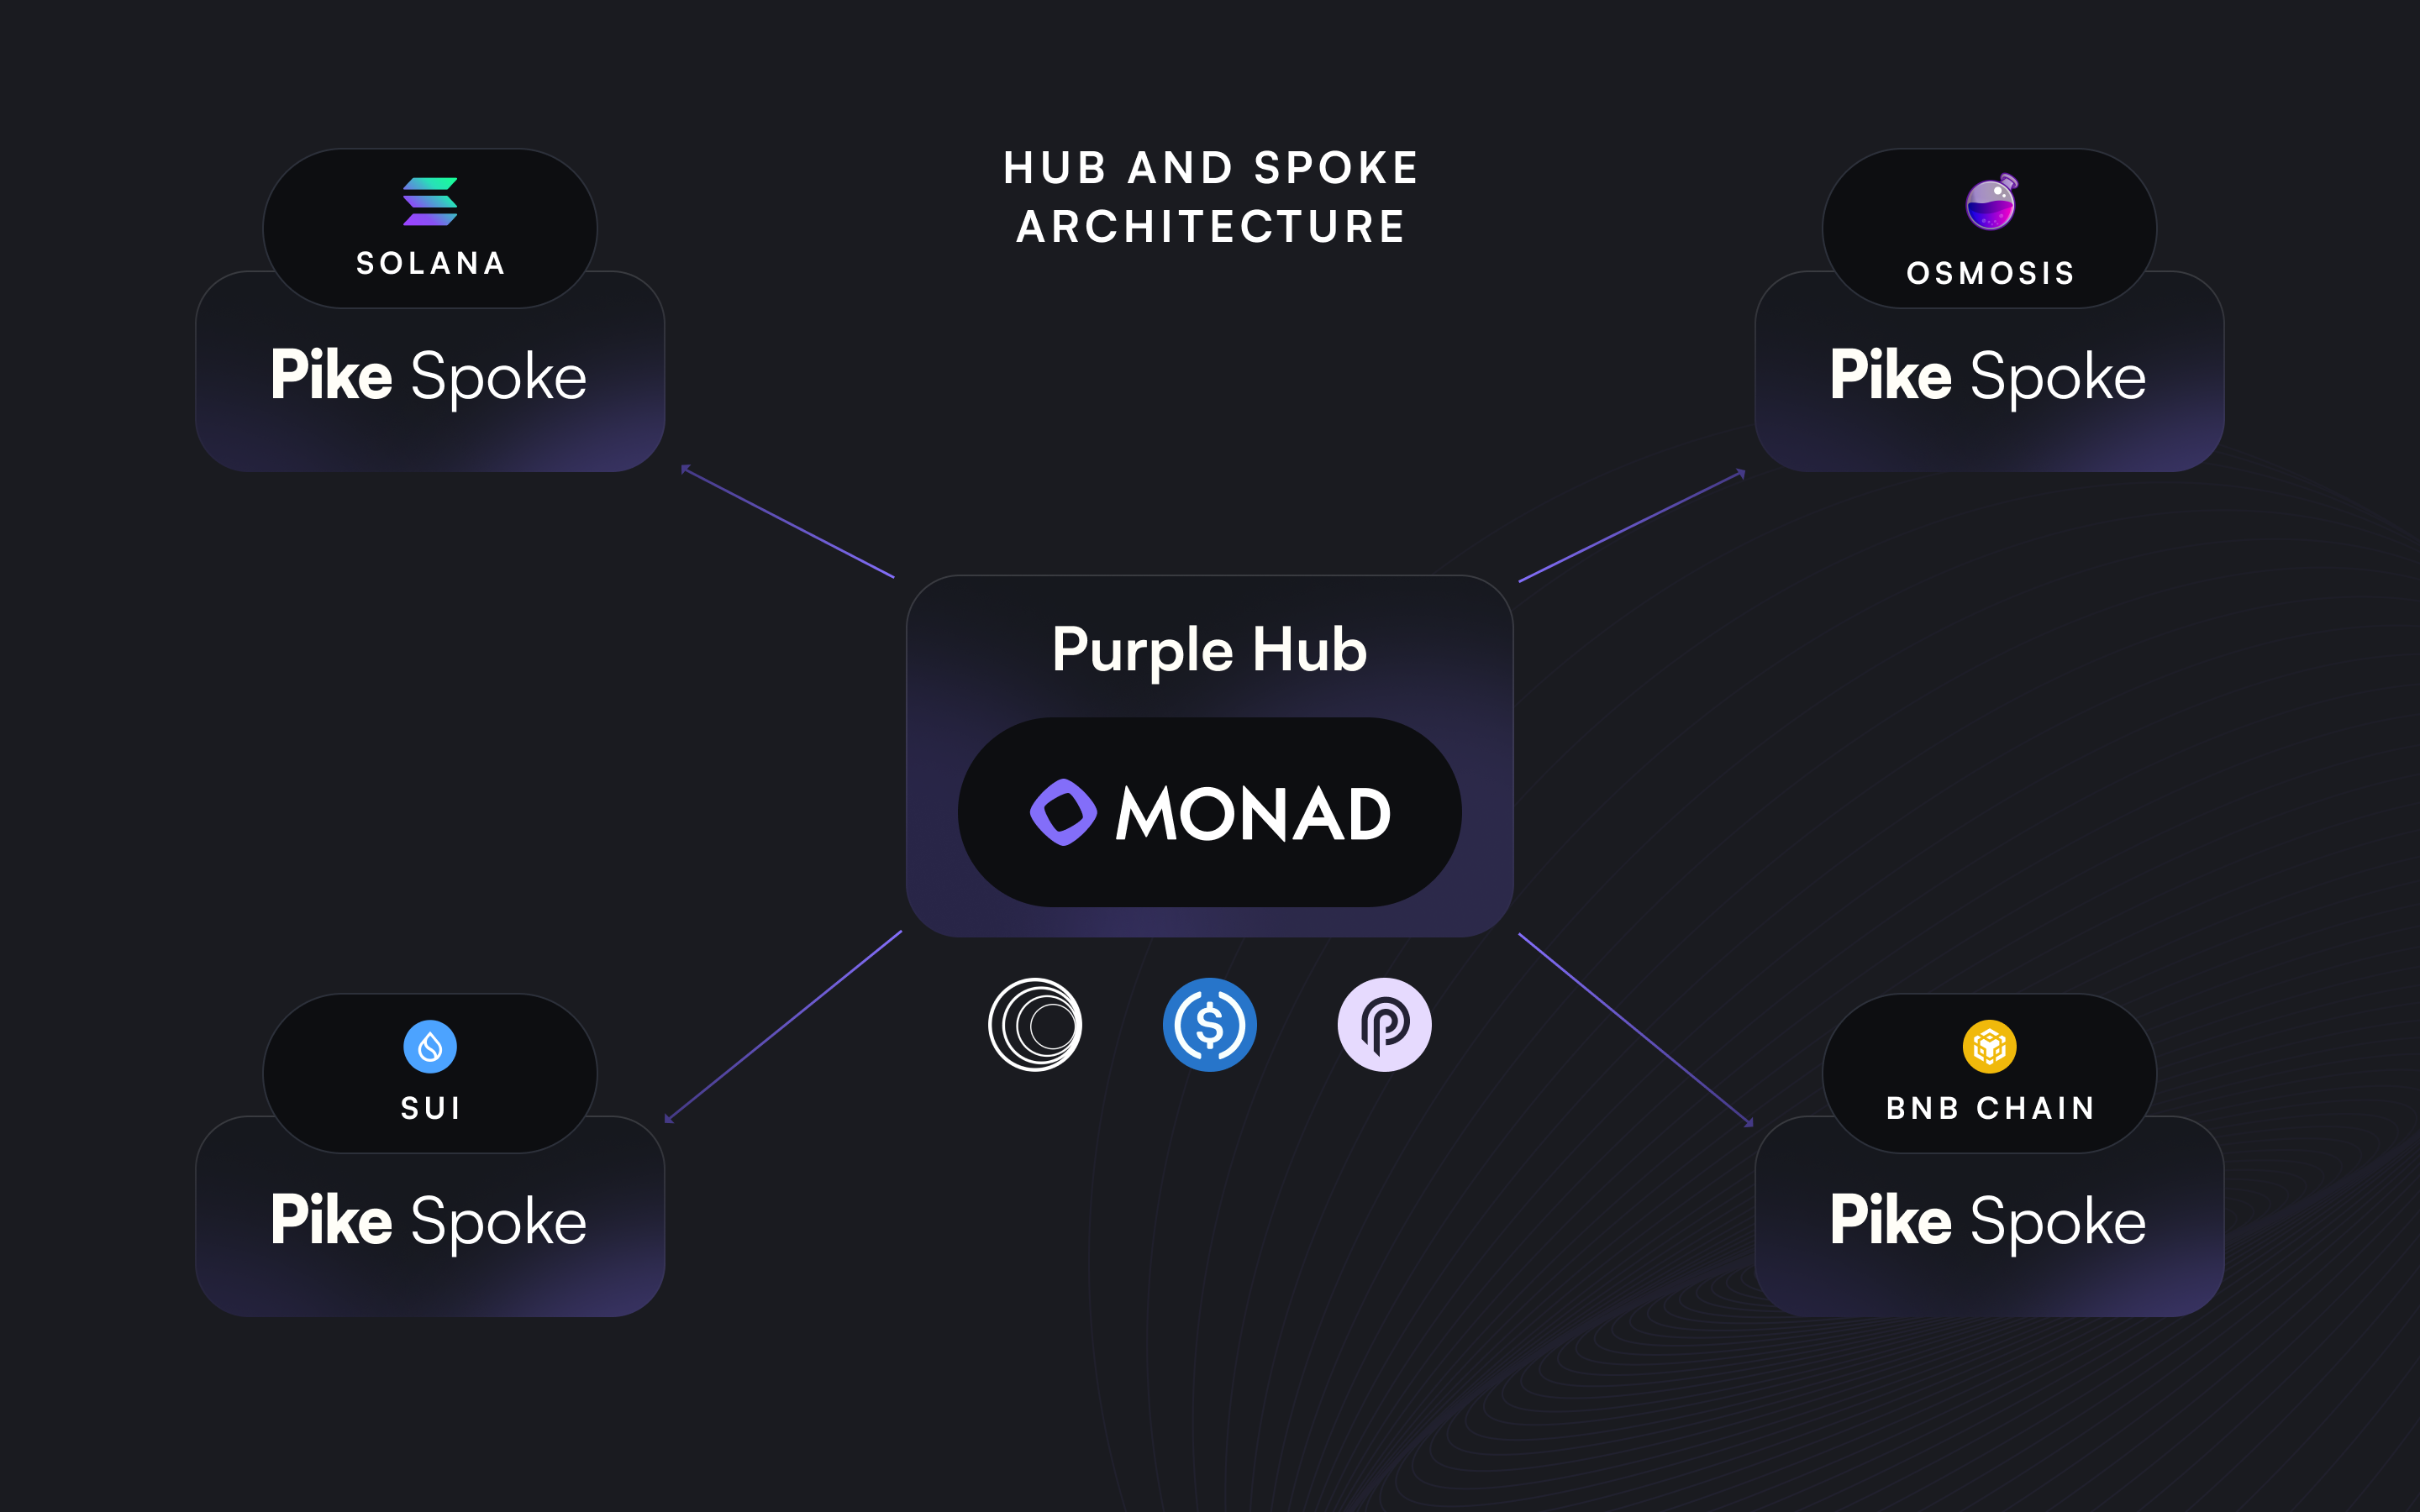 Monad, while the hub, will also of course have it's own spoke deployment as well.